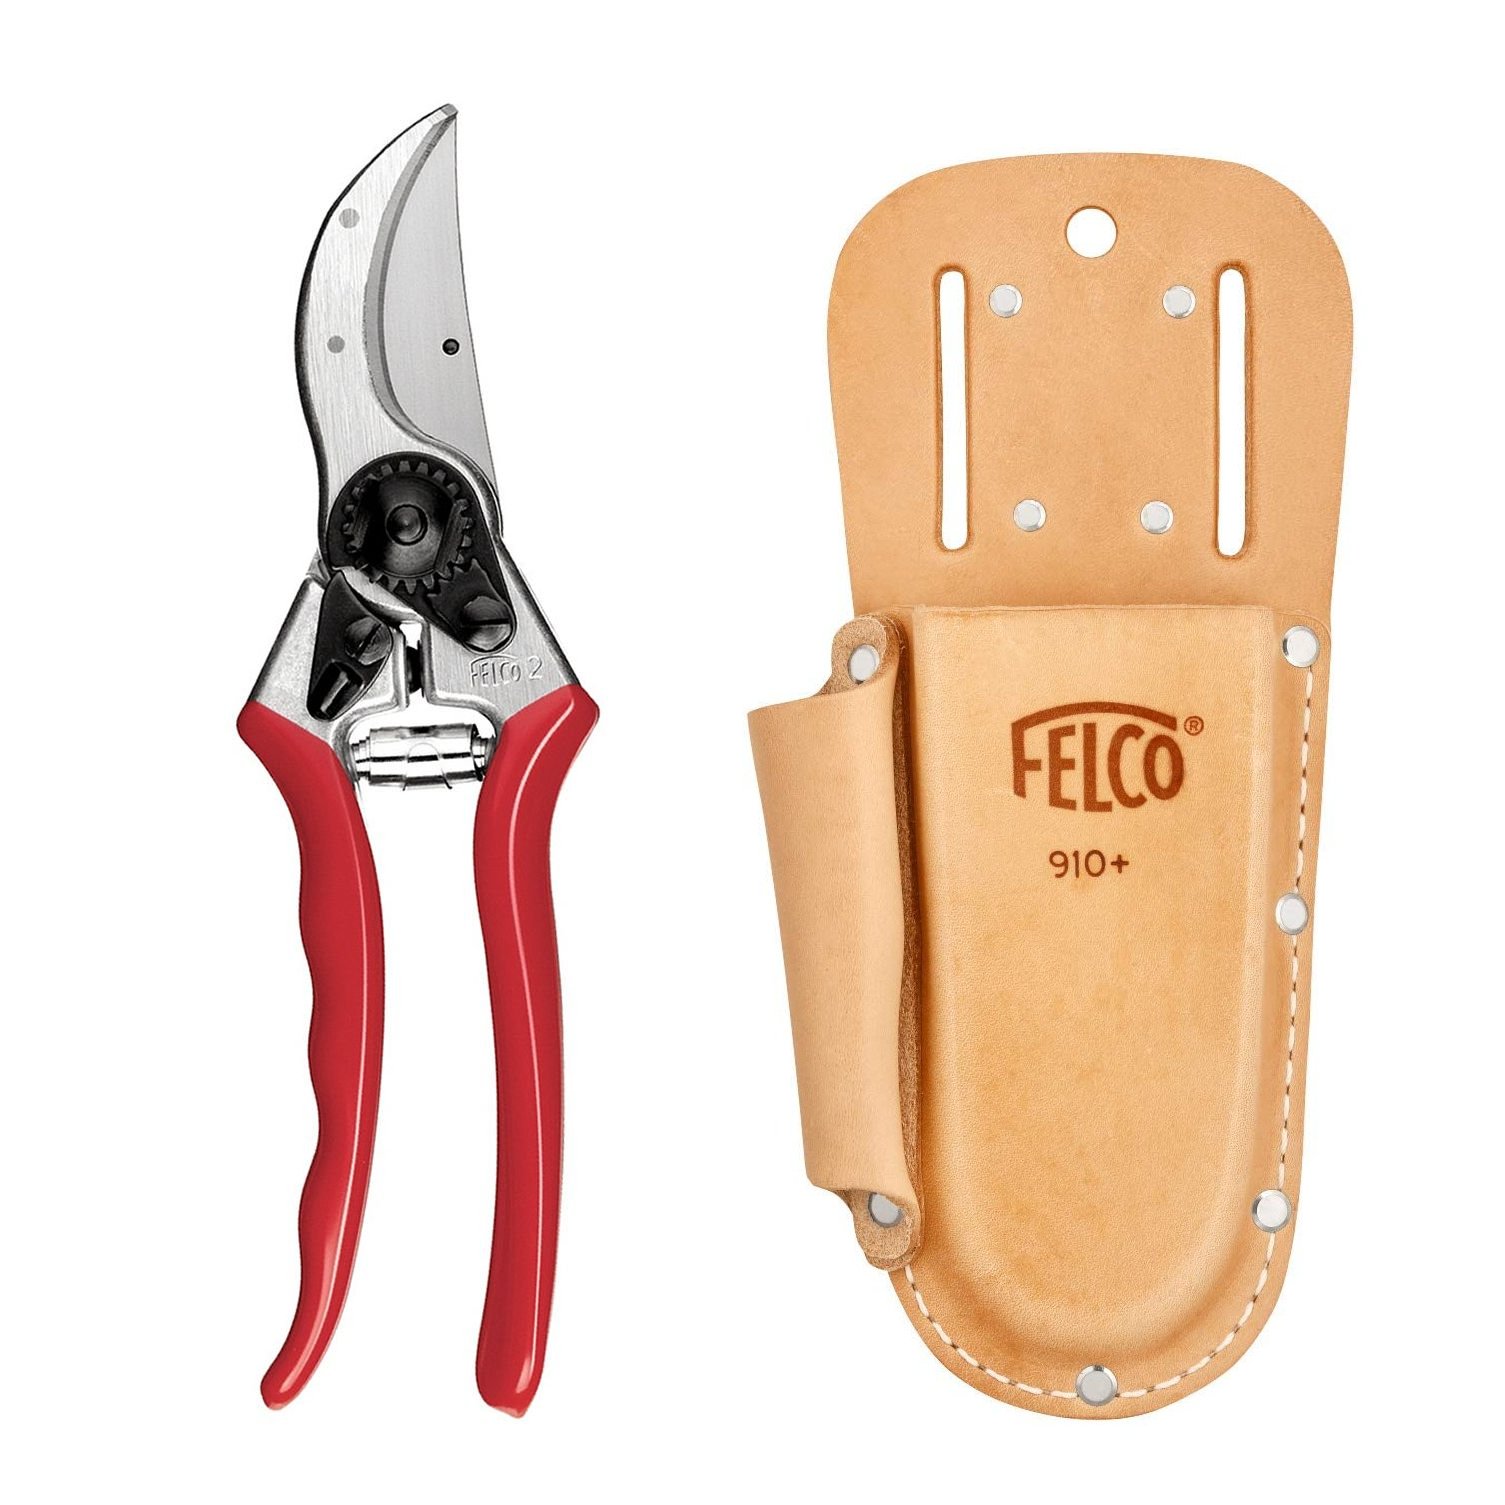 Genuine Felco Model 2 secateurs and Leather Plus holster bundle - official Felco stockist